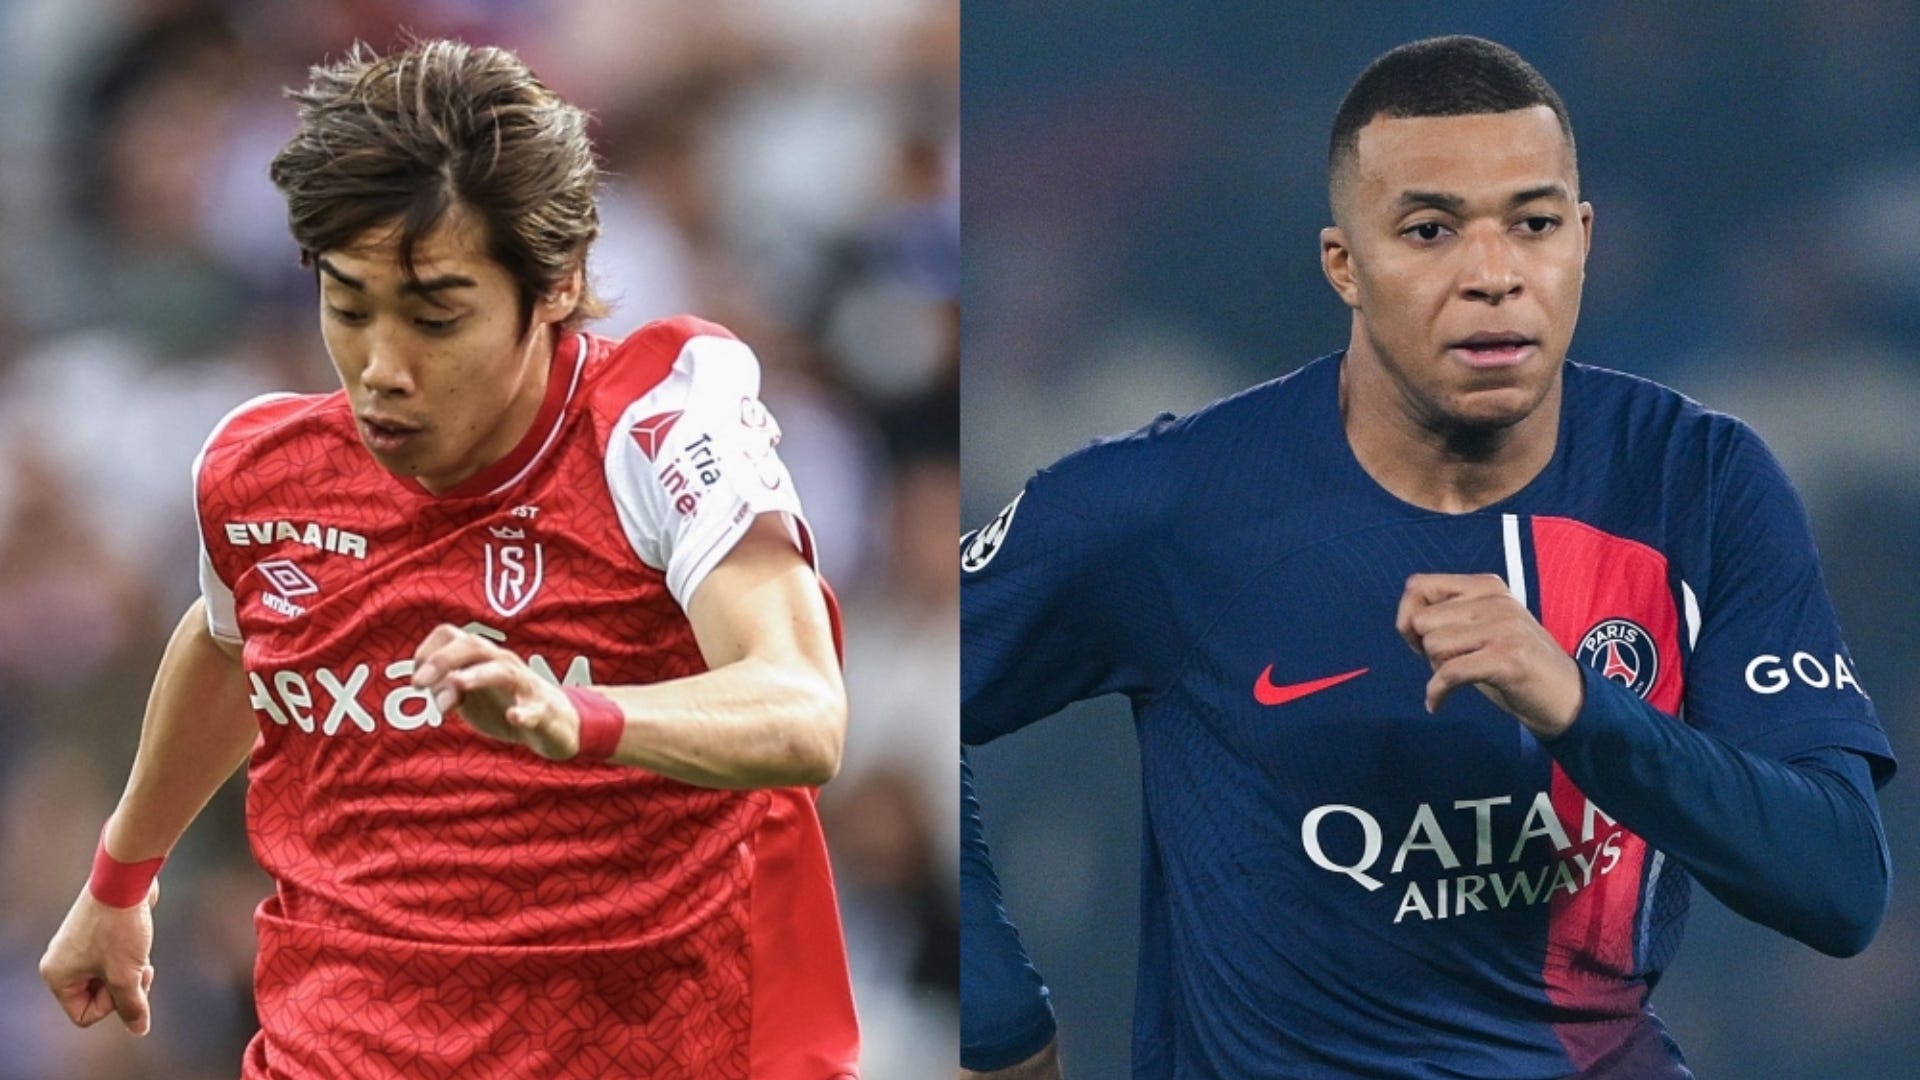 Reims vs PSG Where to watch the match online, live stream, TV channels, and kick-off time Goal UK